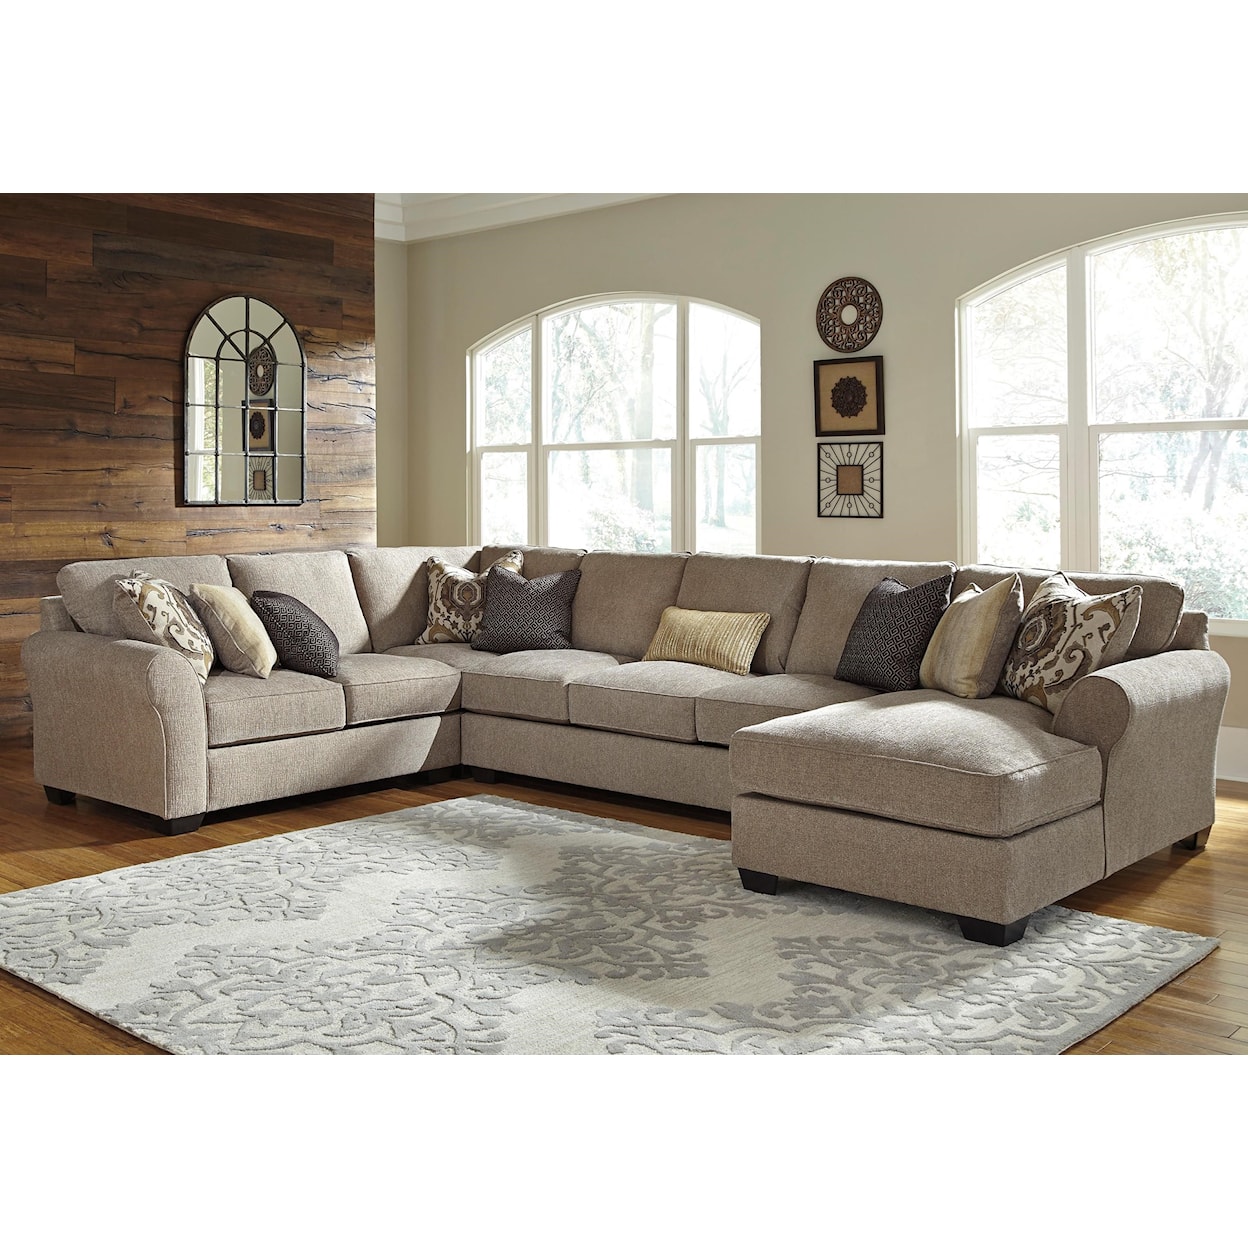 JB King Pantomine 4-Piece Sectional with Chaise